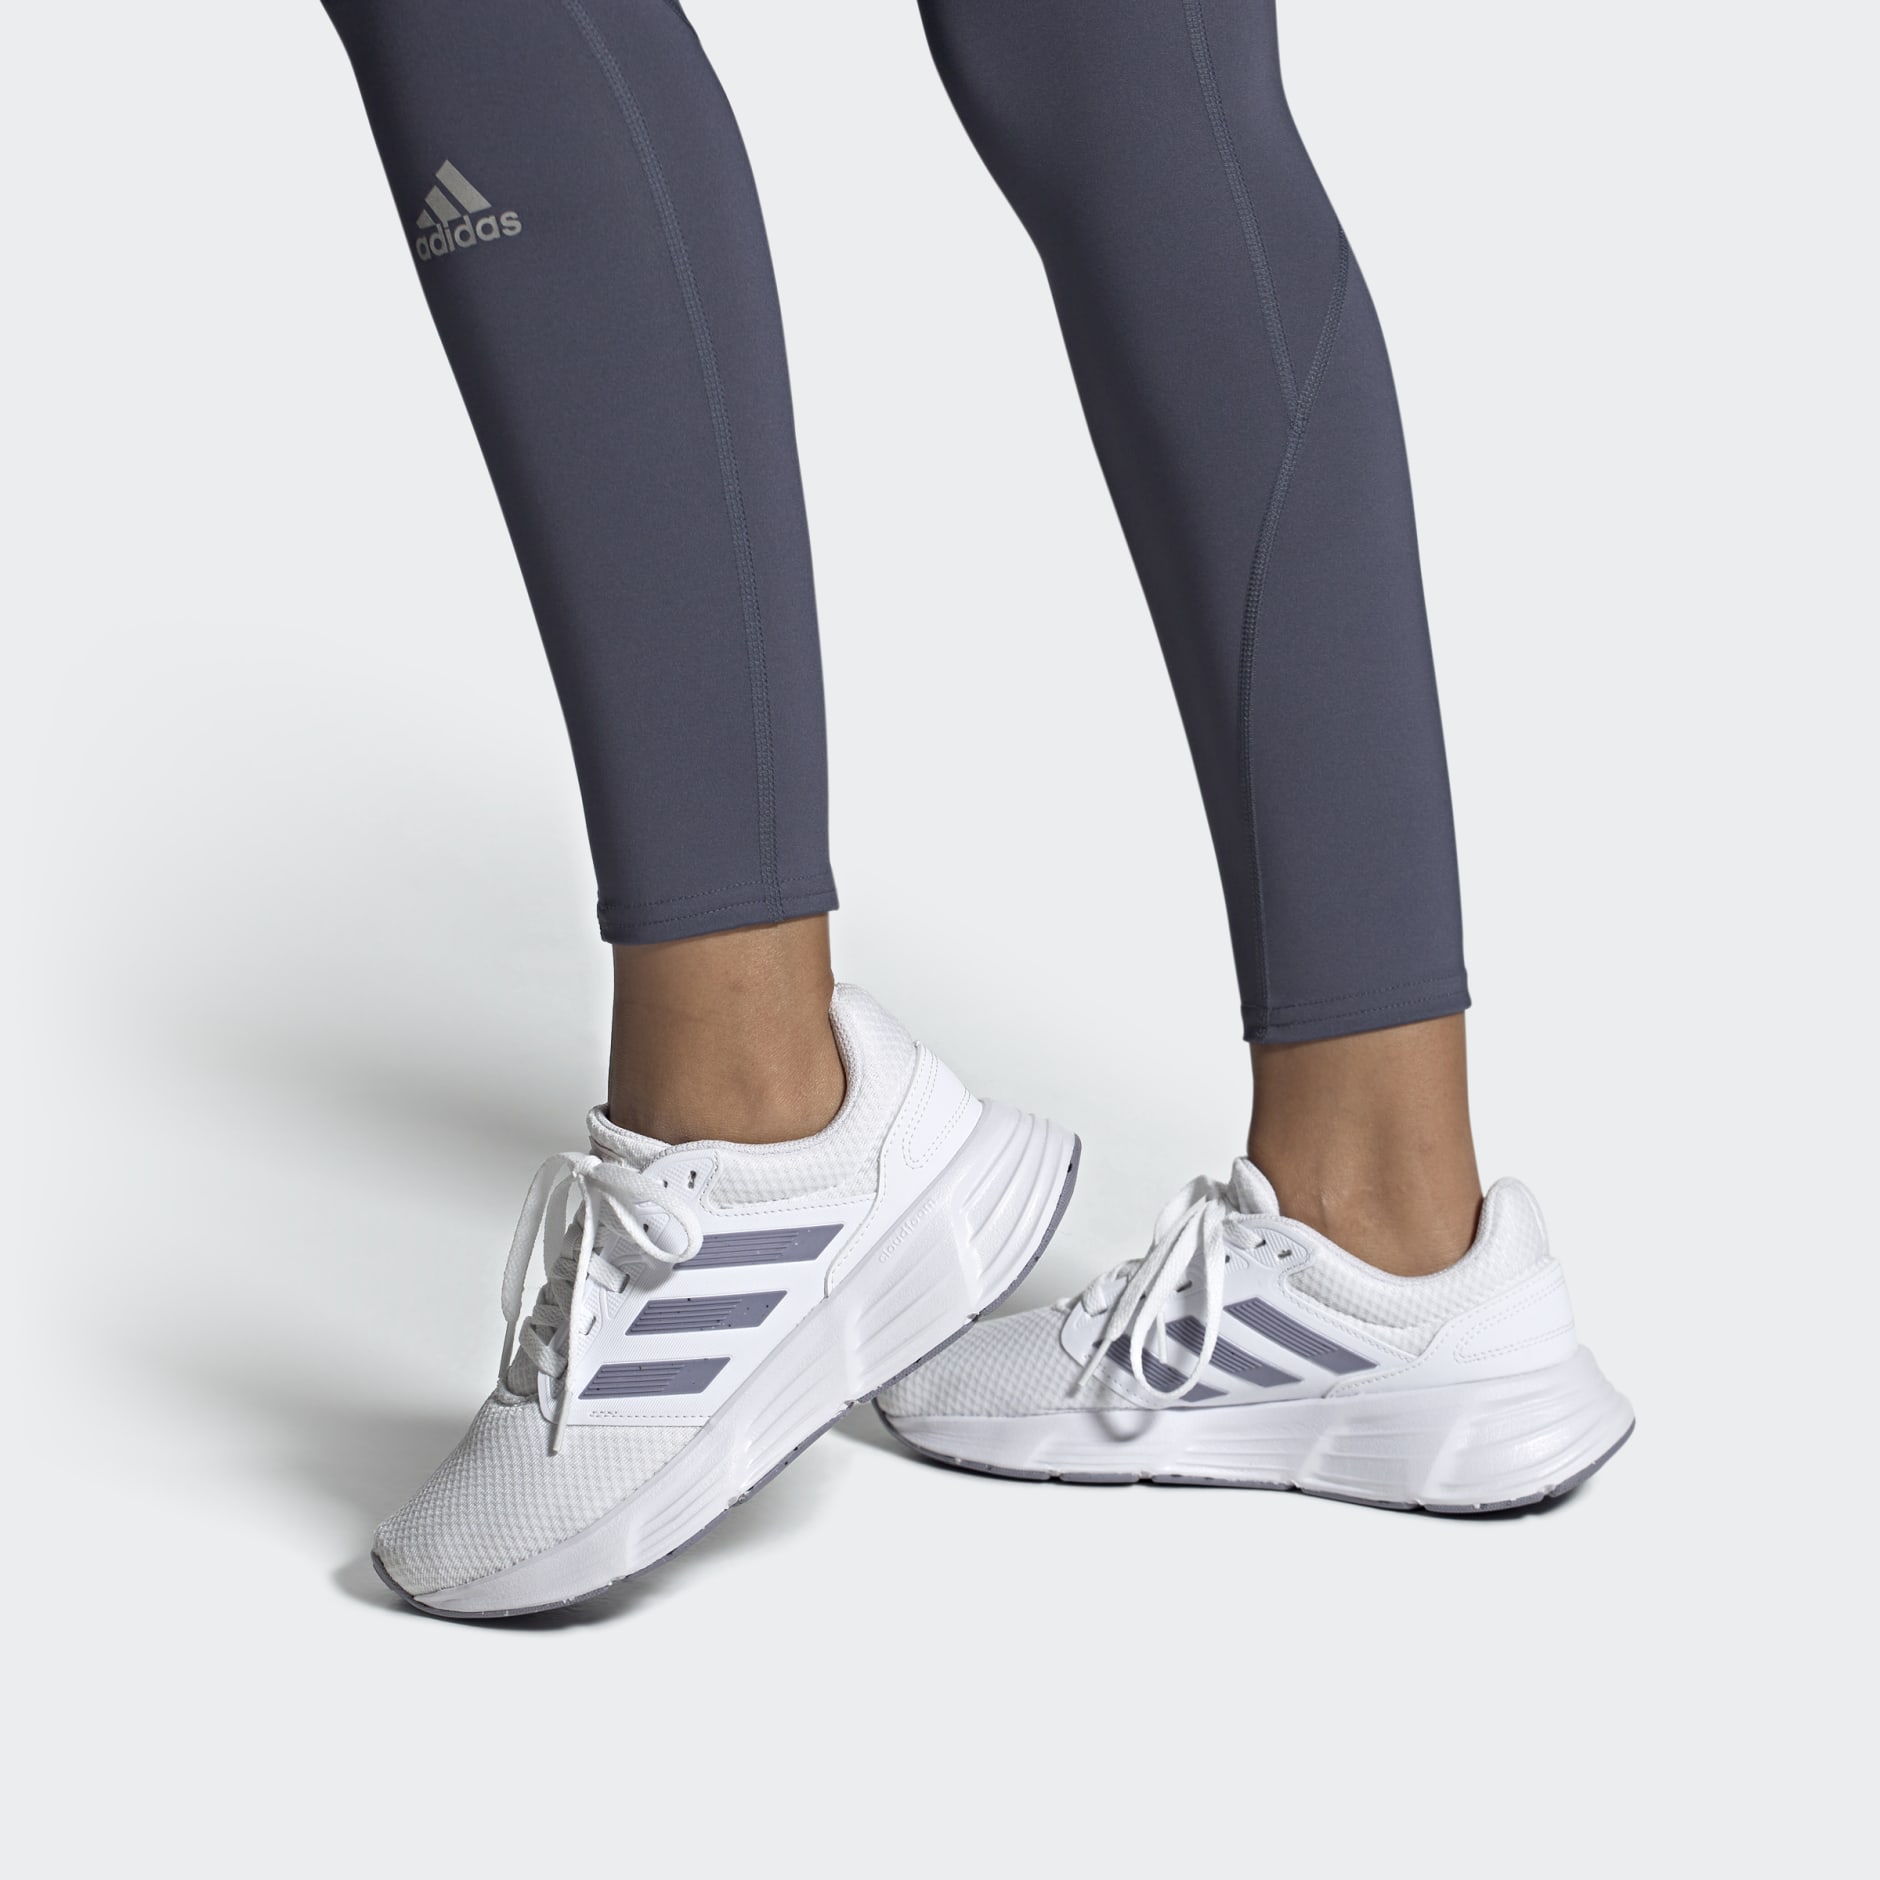 Women's Shoes - Galaxy 6 Shoes - White | adidas Egypt